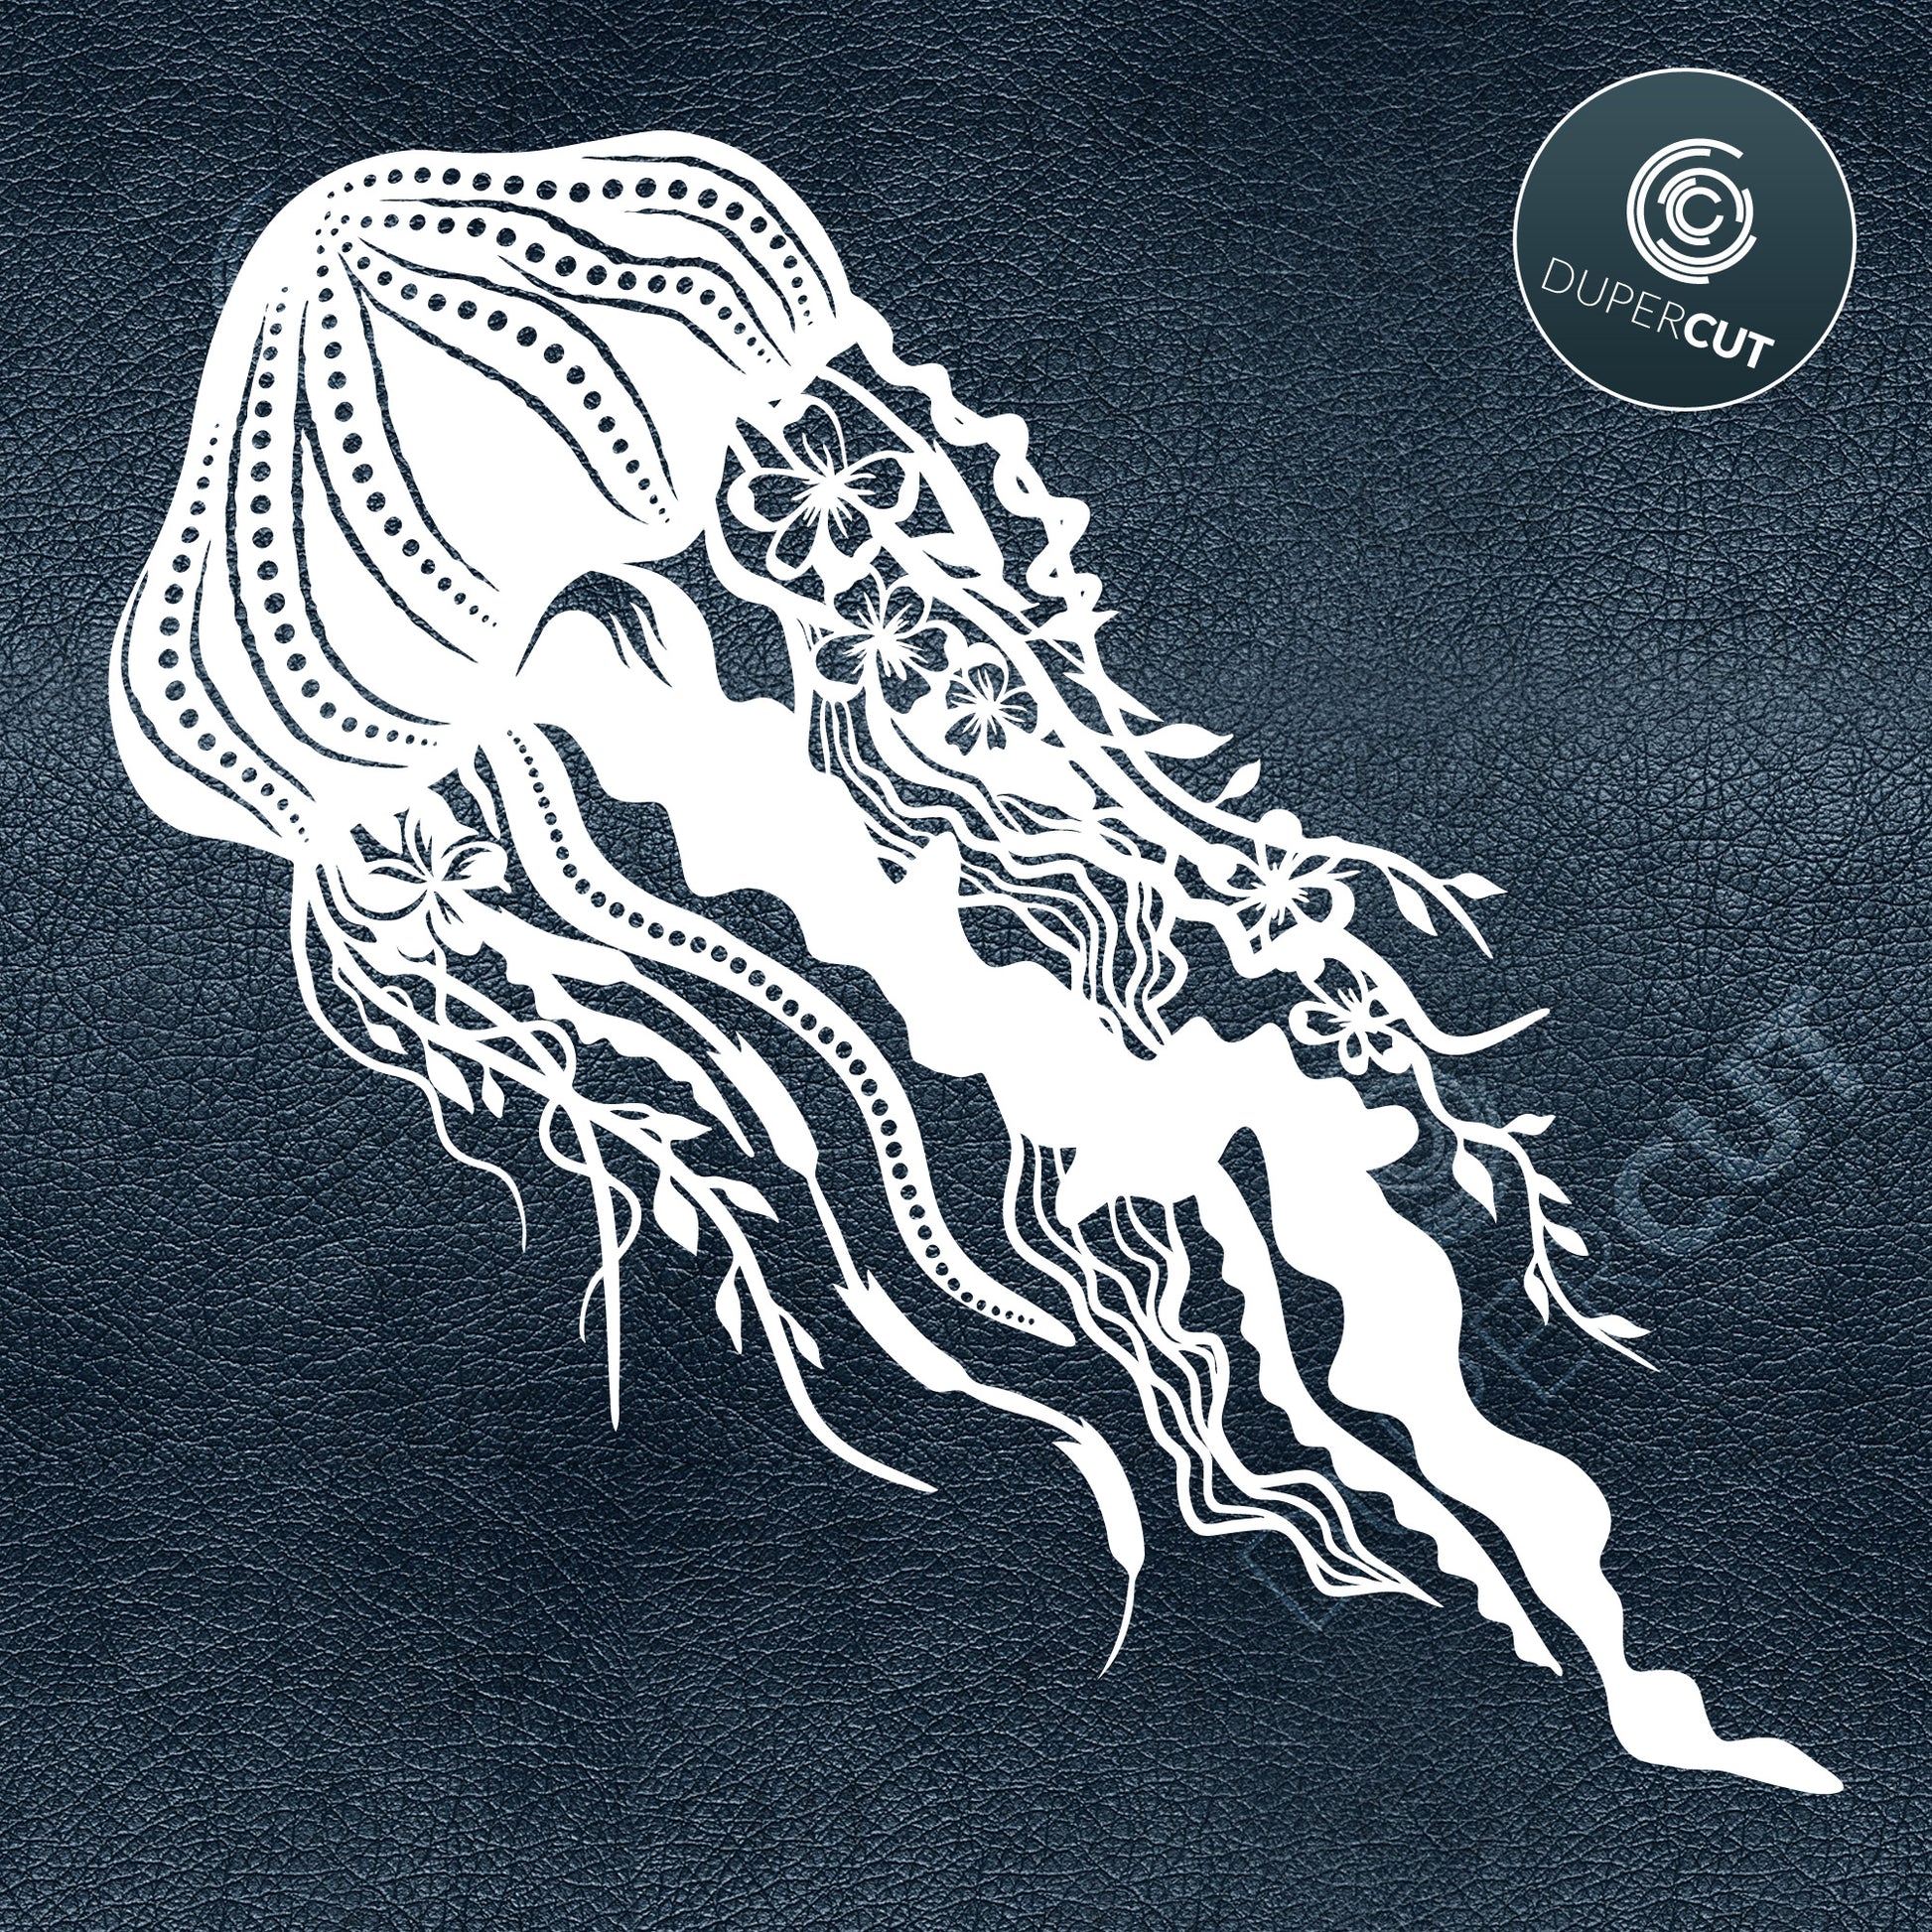 Jellyfish with flowers. Paper cutting template for commercial use. SVG files for Silhouette Cameo, Cricut, Glowforge, DXF for CNC, laser cutting, print on demand